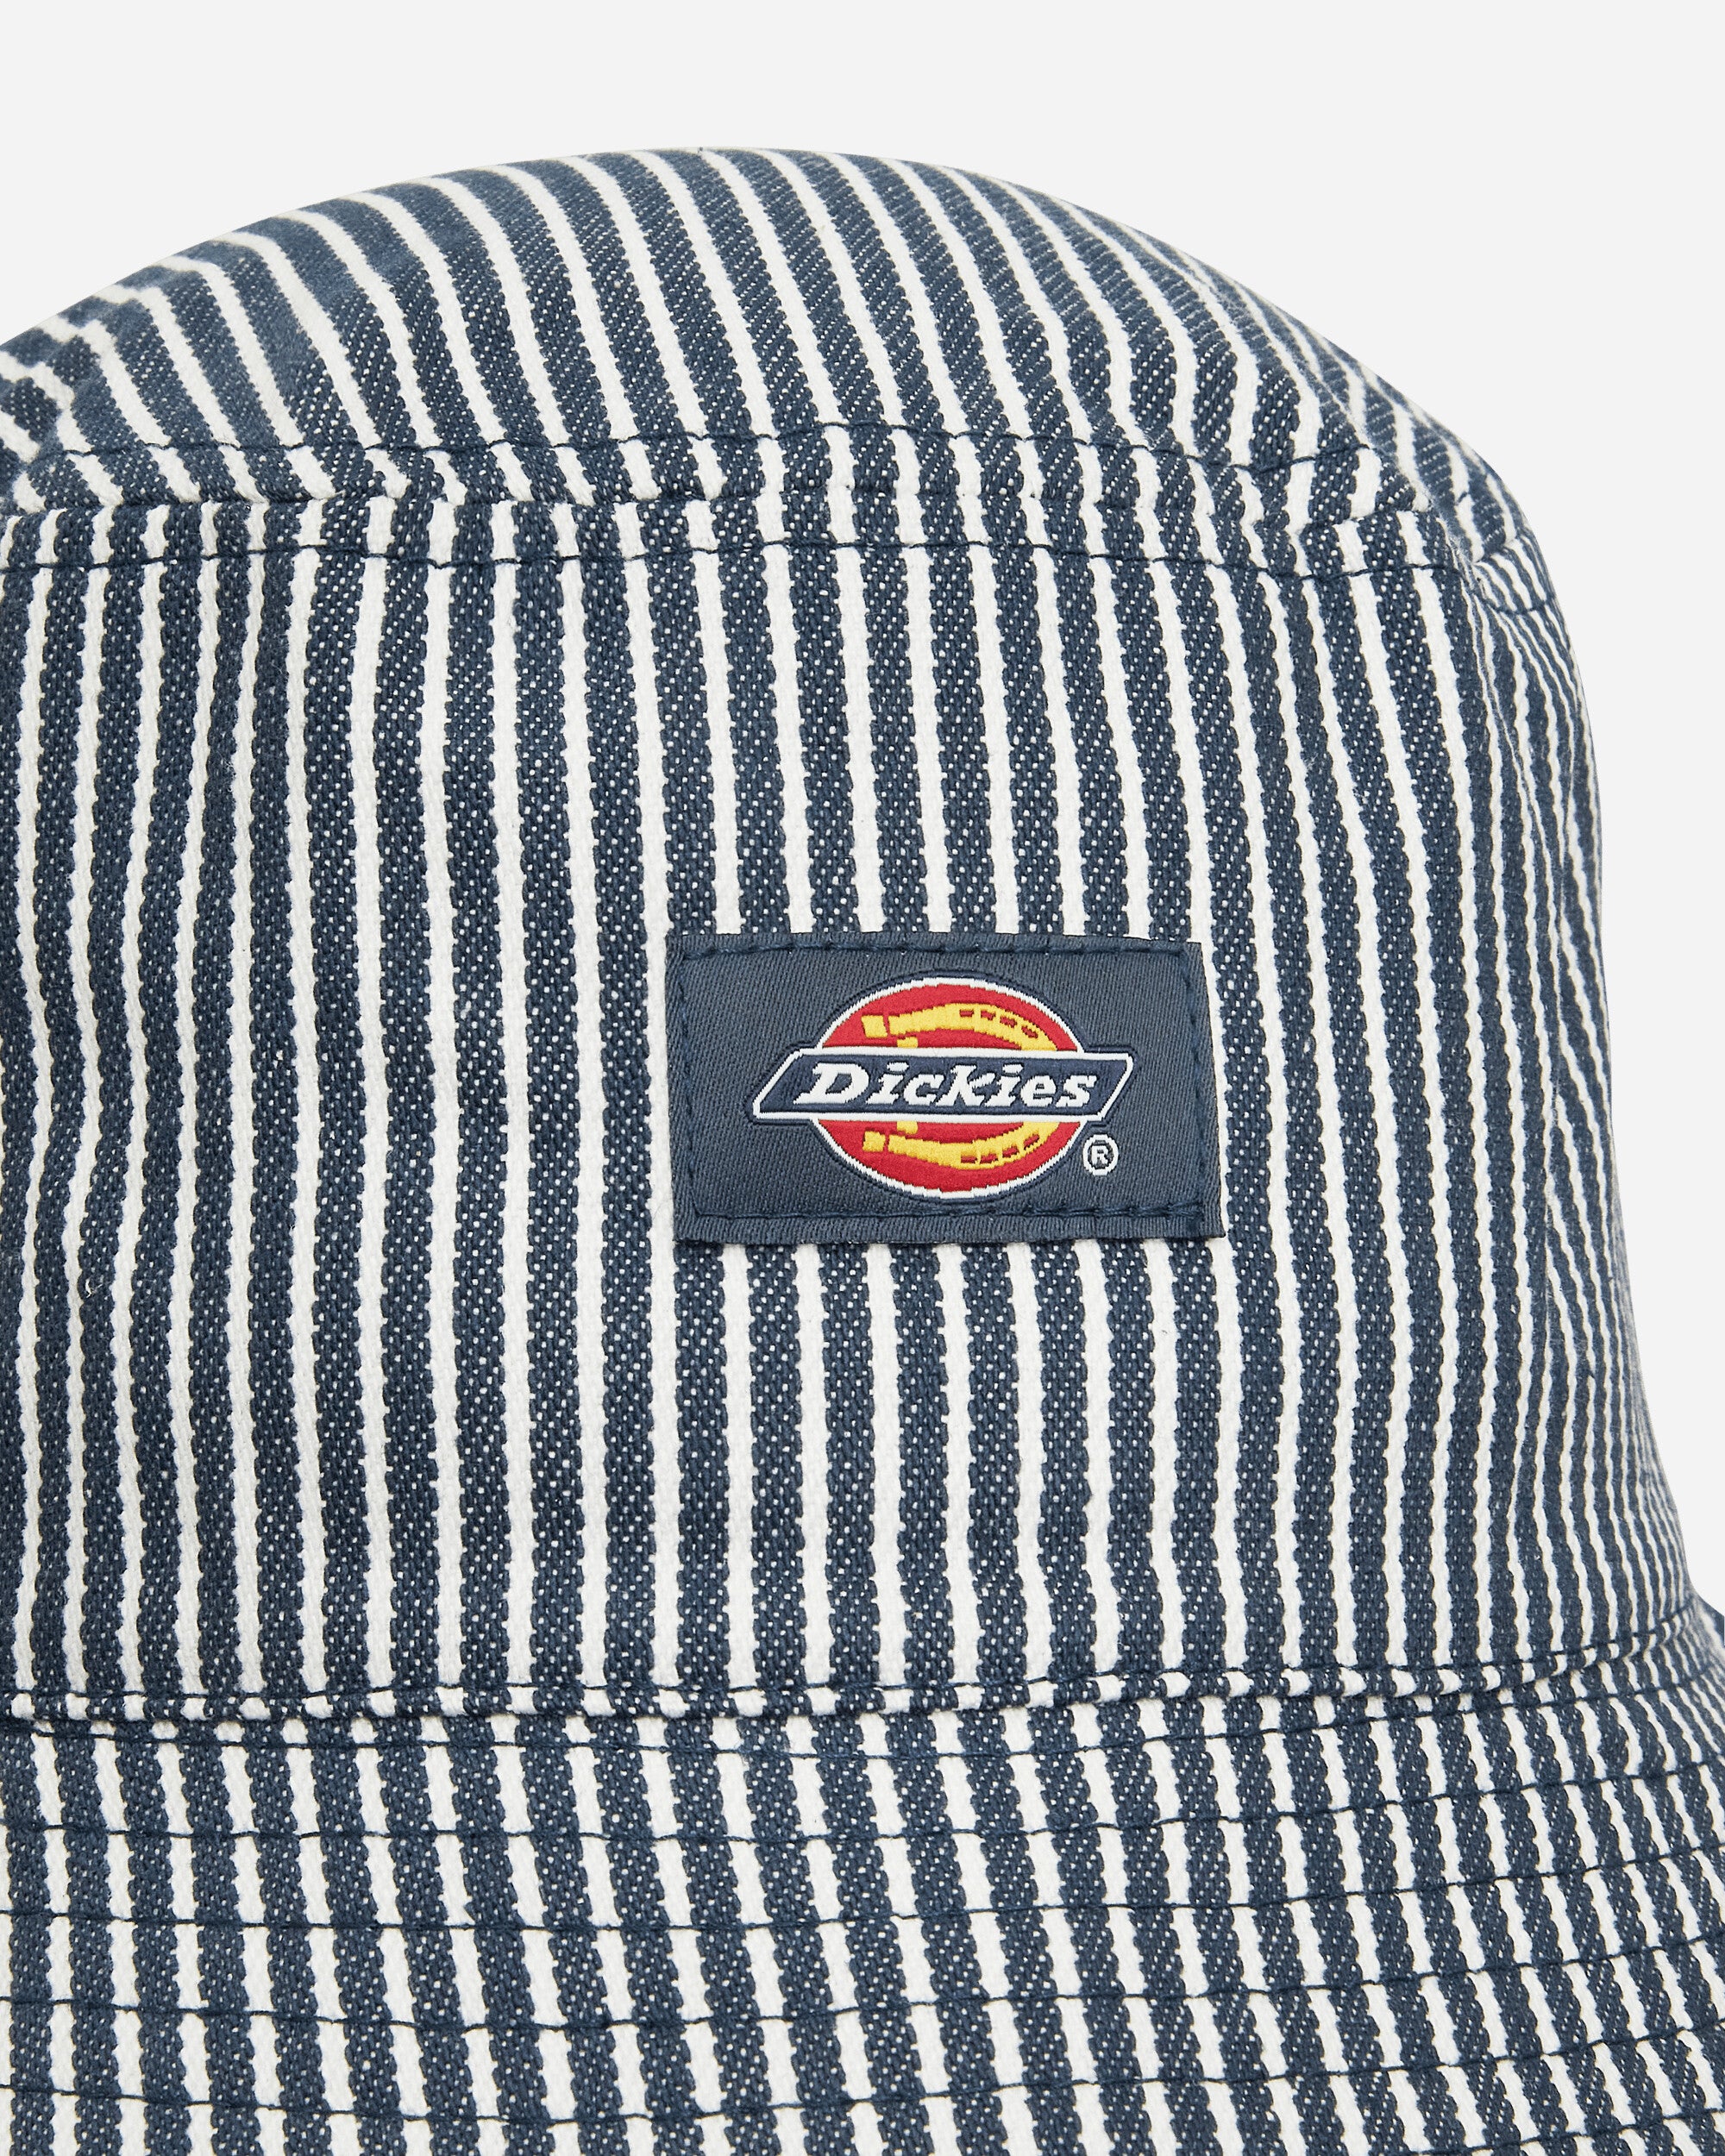 Dickies Hickory Bucket Af Hickory Hats Bucket DK0A4Y9R F341